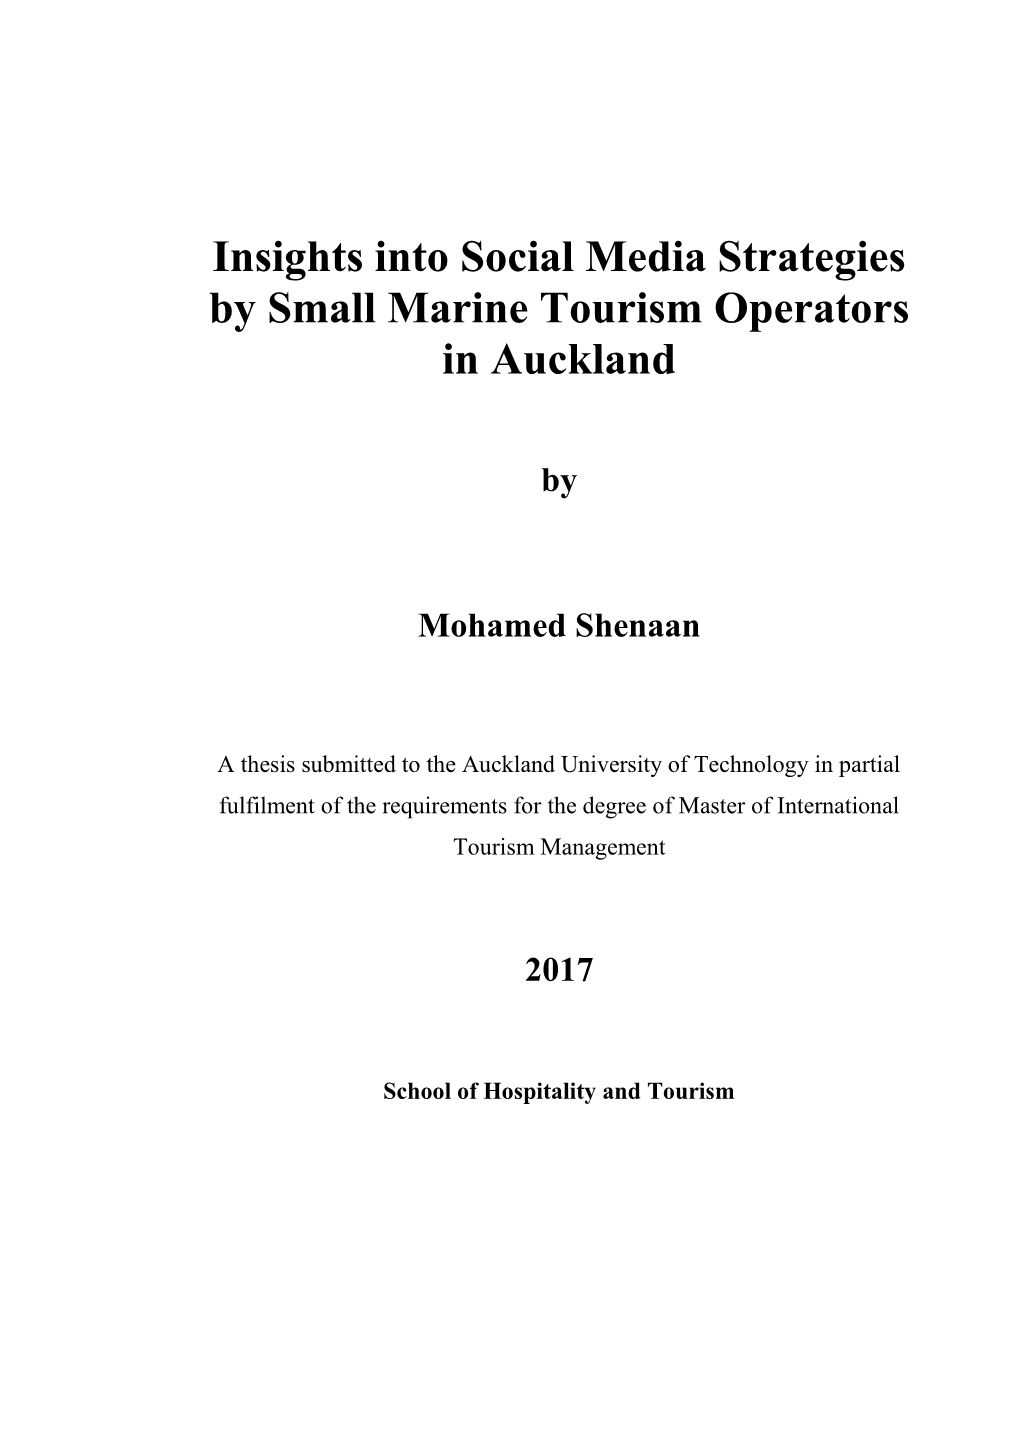 Insights Into Social Media Strategies by Small Marine Tourism Operators in Auckland